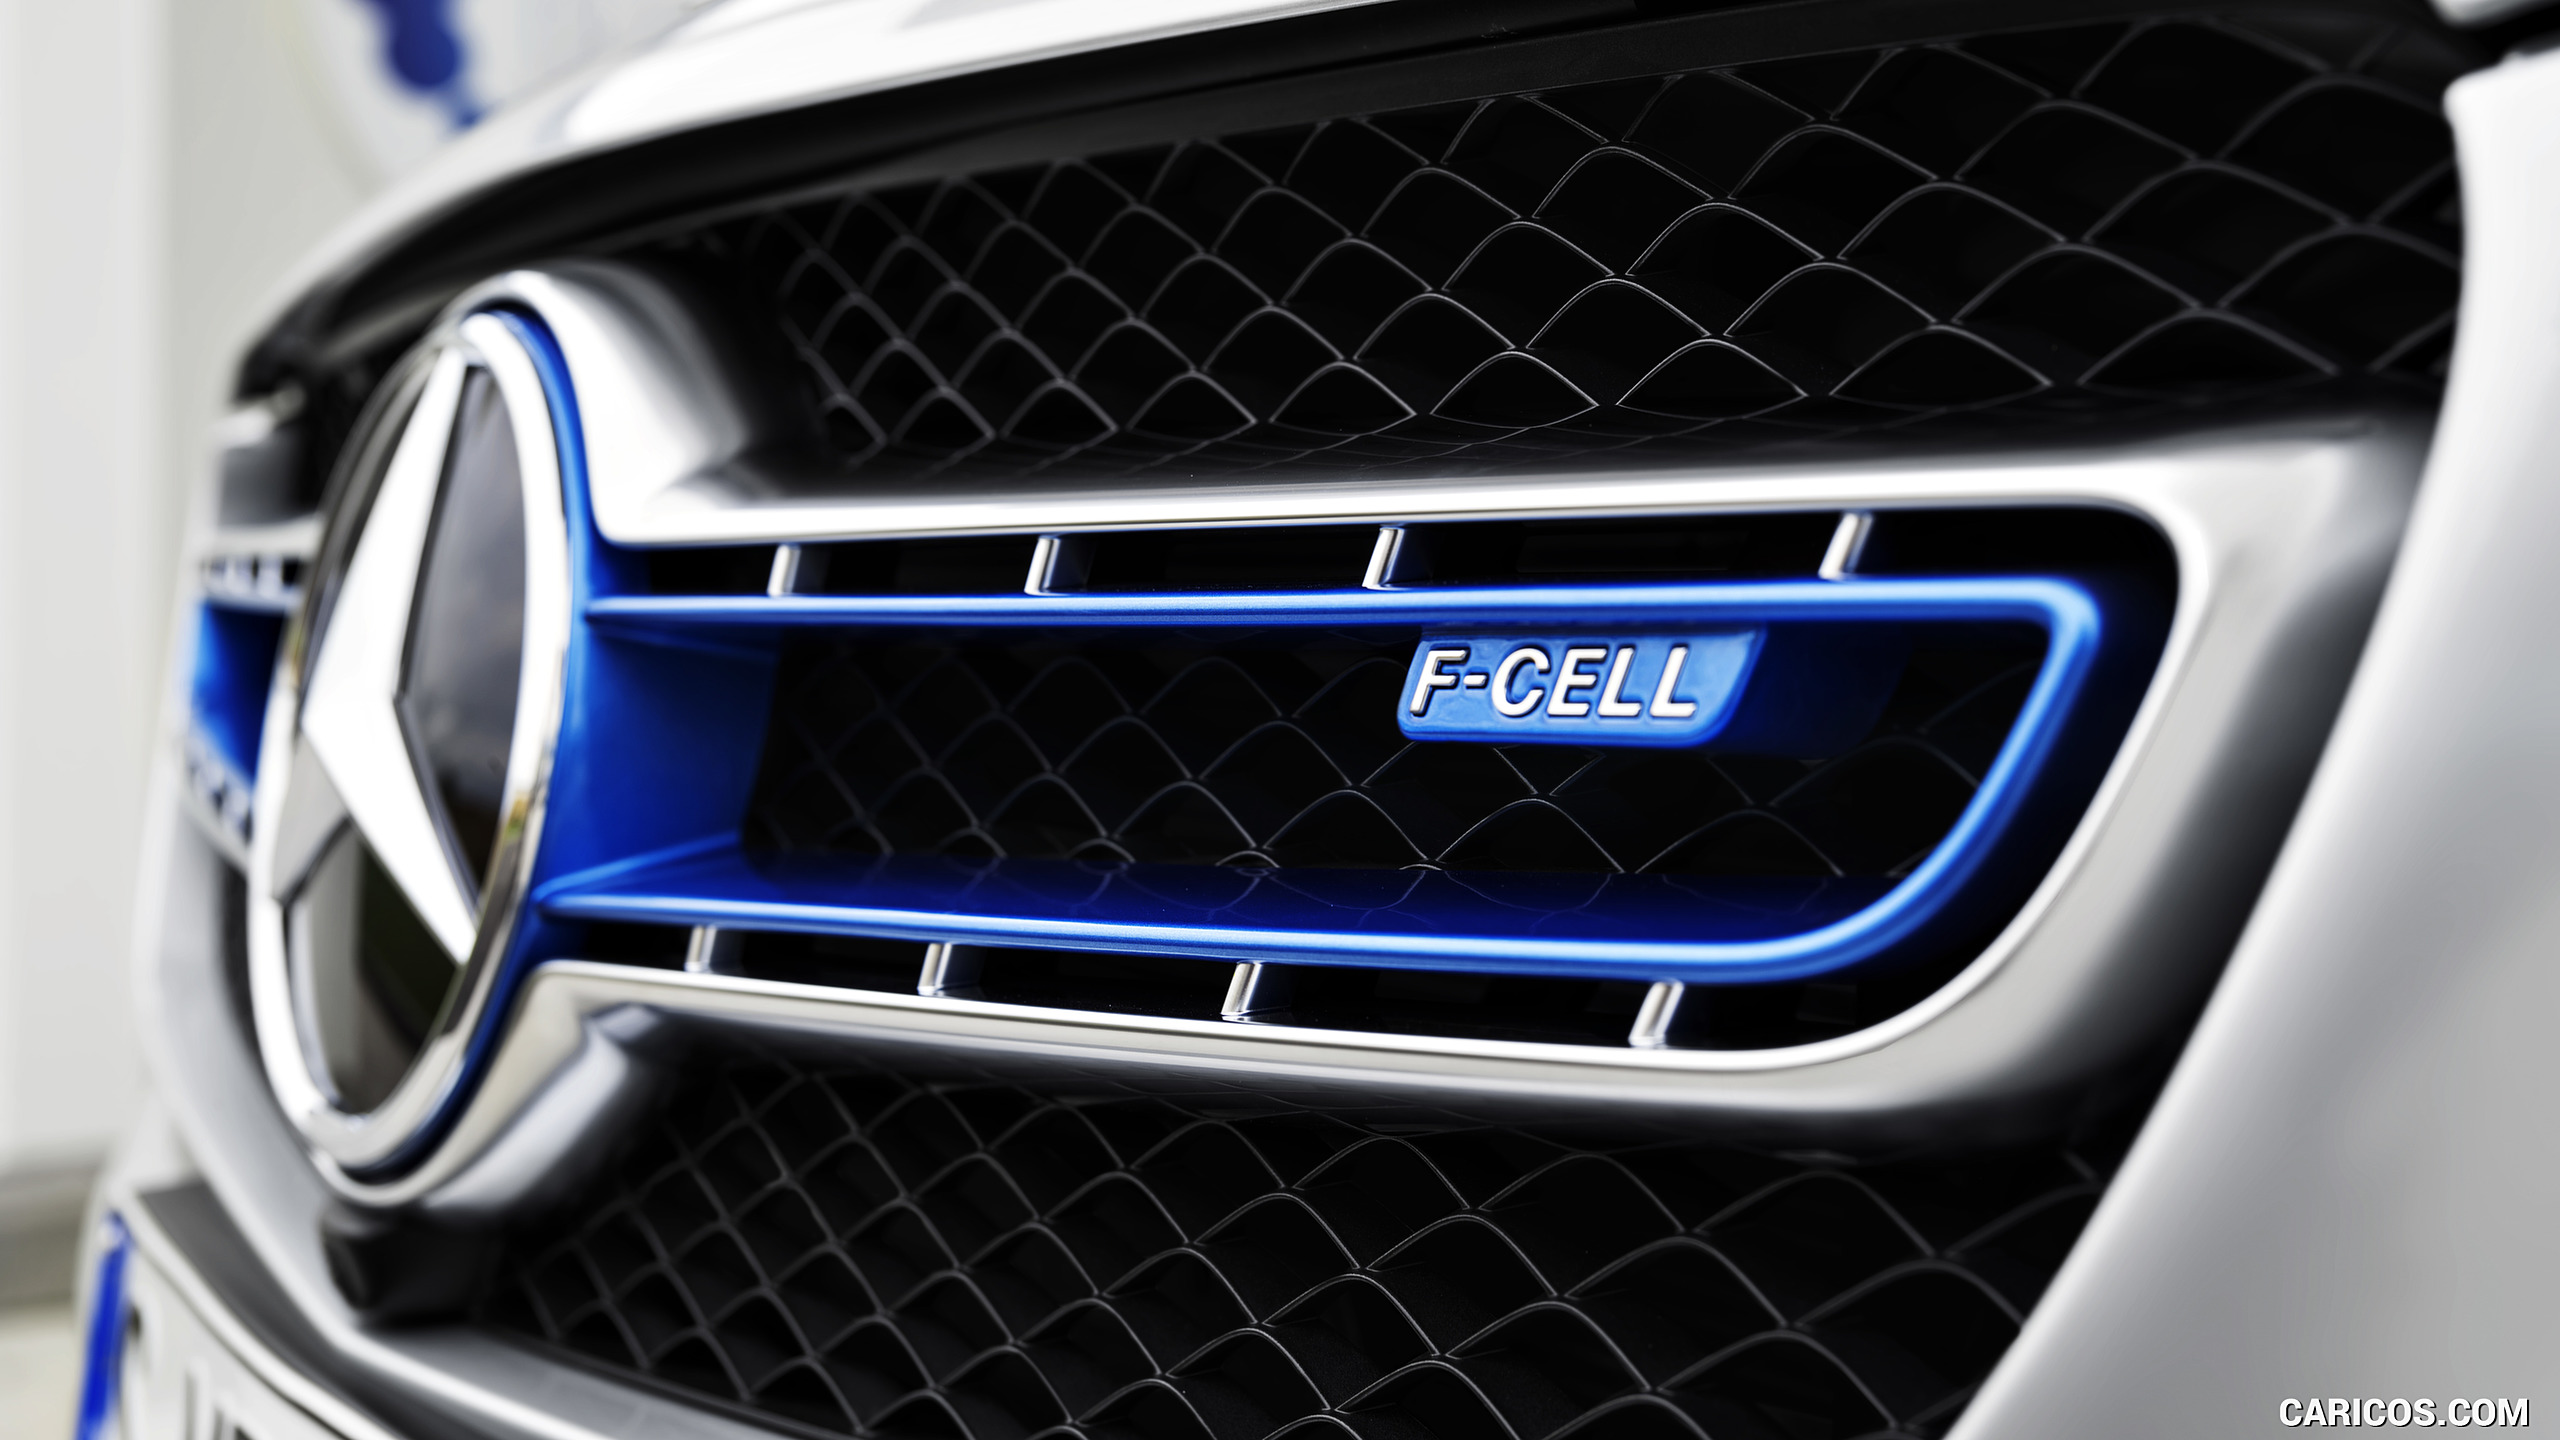 2017 Mercedes-Benz GLC F-CELL Concept - Grille, #15 of 25